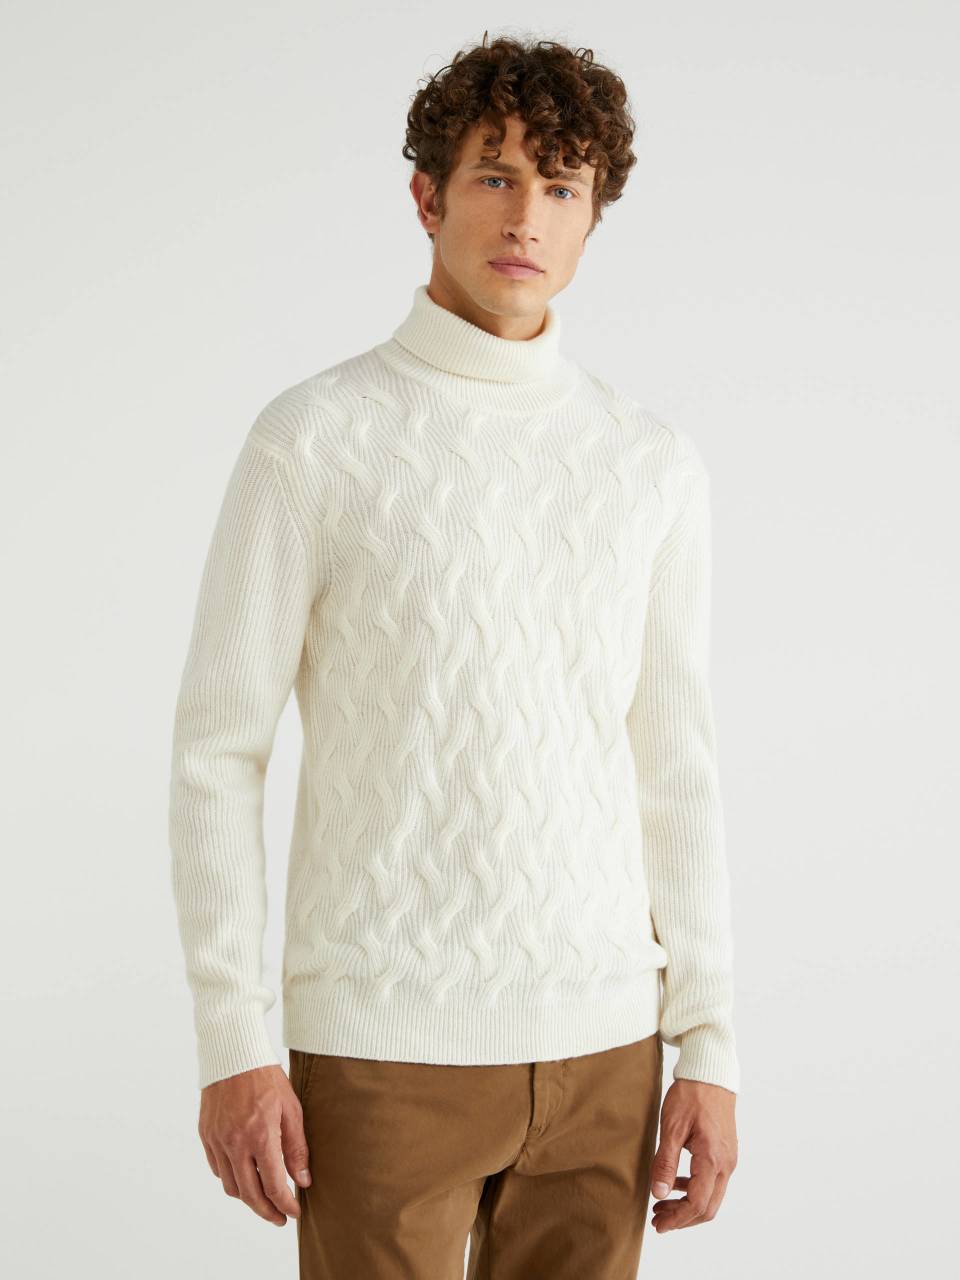 Benetton Wool and cashmere turtleneck. 1